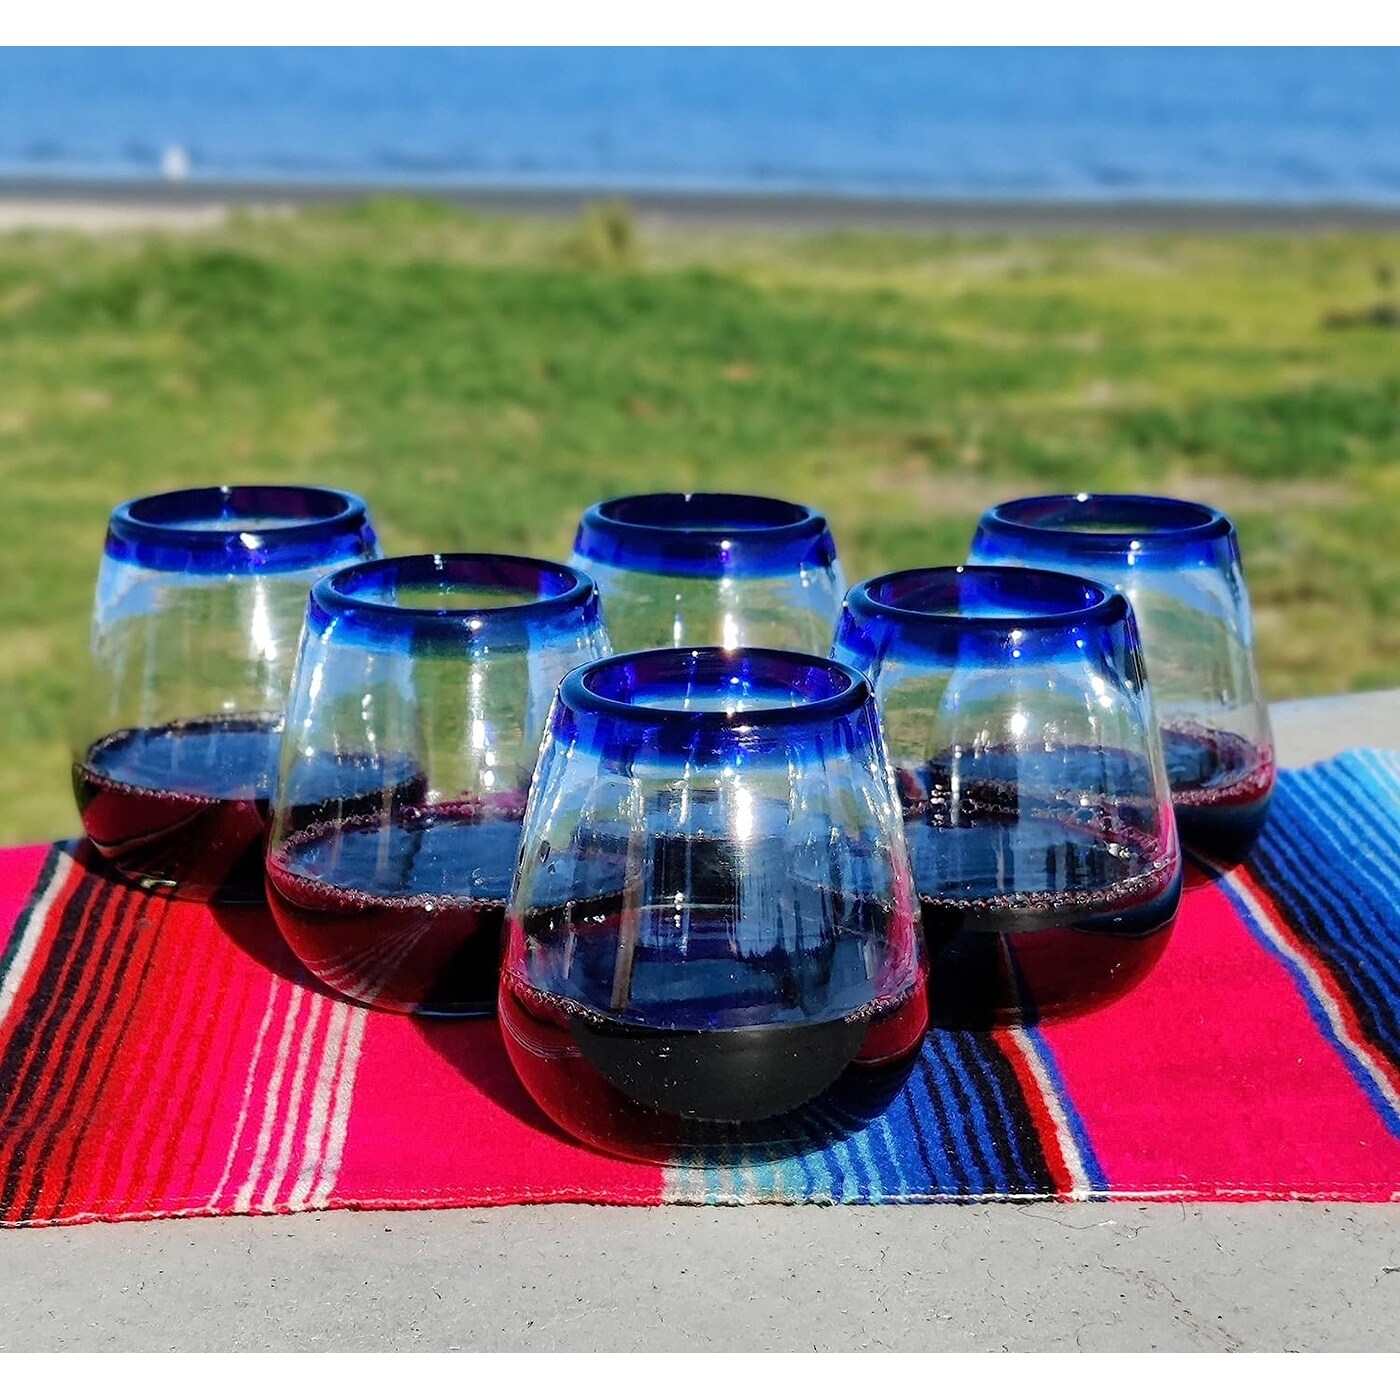 https://ak1.ostkcdn.com/images/products/is/images/direct/7b051c813825dab36ebe1fa395cf742b1e55826f/Hand-Blown-Mexican-Stemless-Wine-Glasses---Set-of-6-Glasses-with-Cobalt-Blue-Rims-%2815-oz%29.jpg